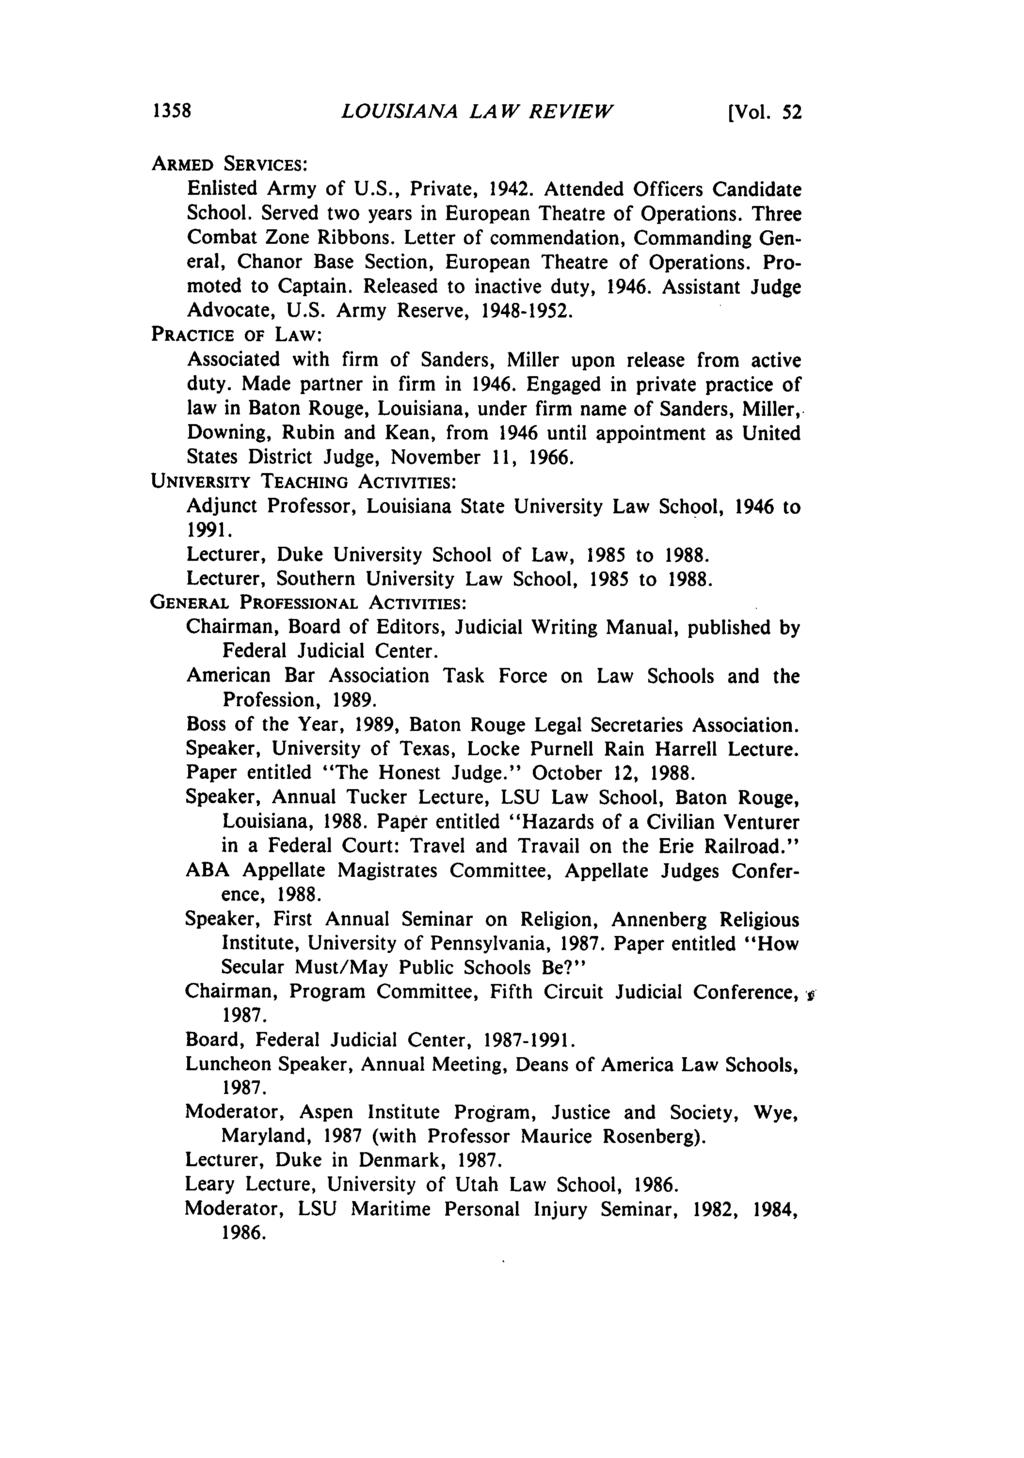 1358 LOUISIANA LAW REVIEW [Vol. 52 ARMED SERVICES: Enlisted Army of U.S., Private, 1942. Attended Officers Candidate School. Served two years in European Theatre of Operations.